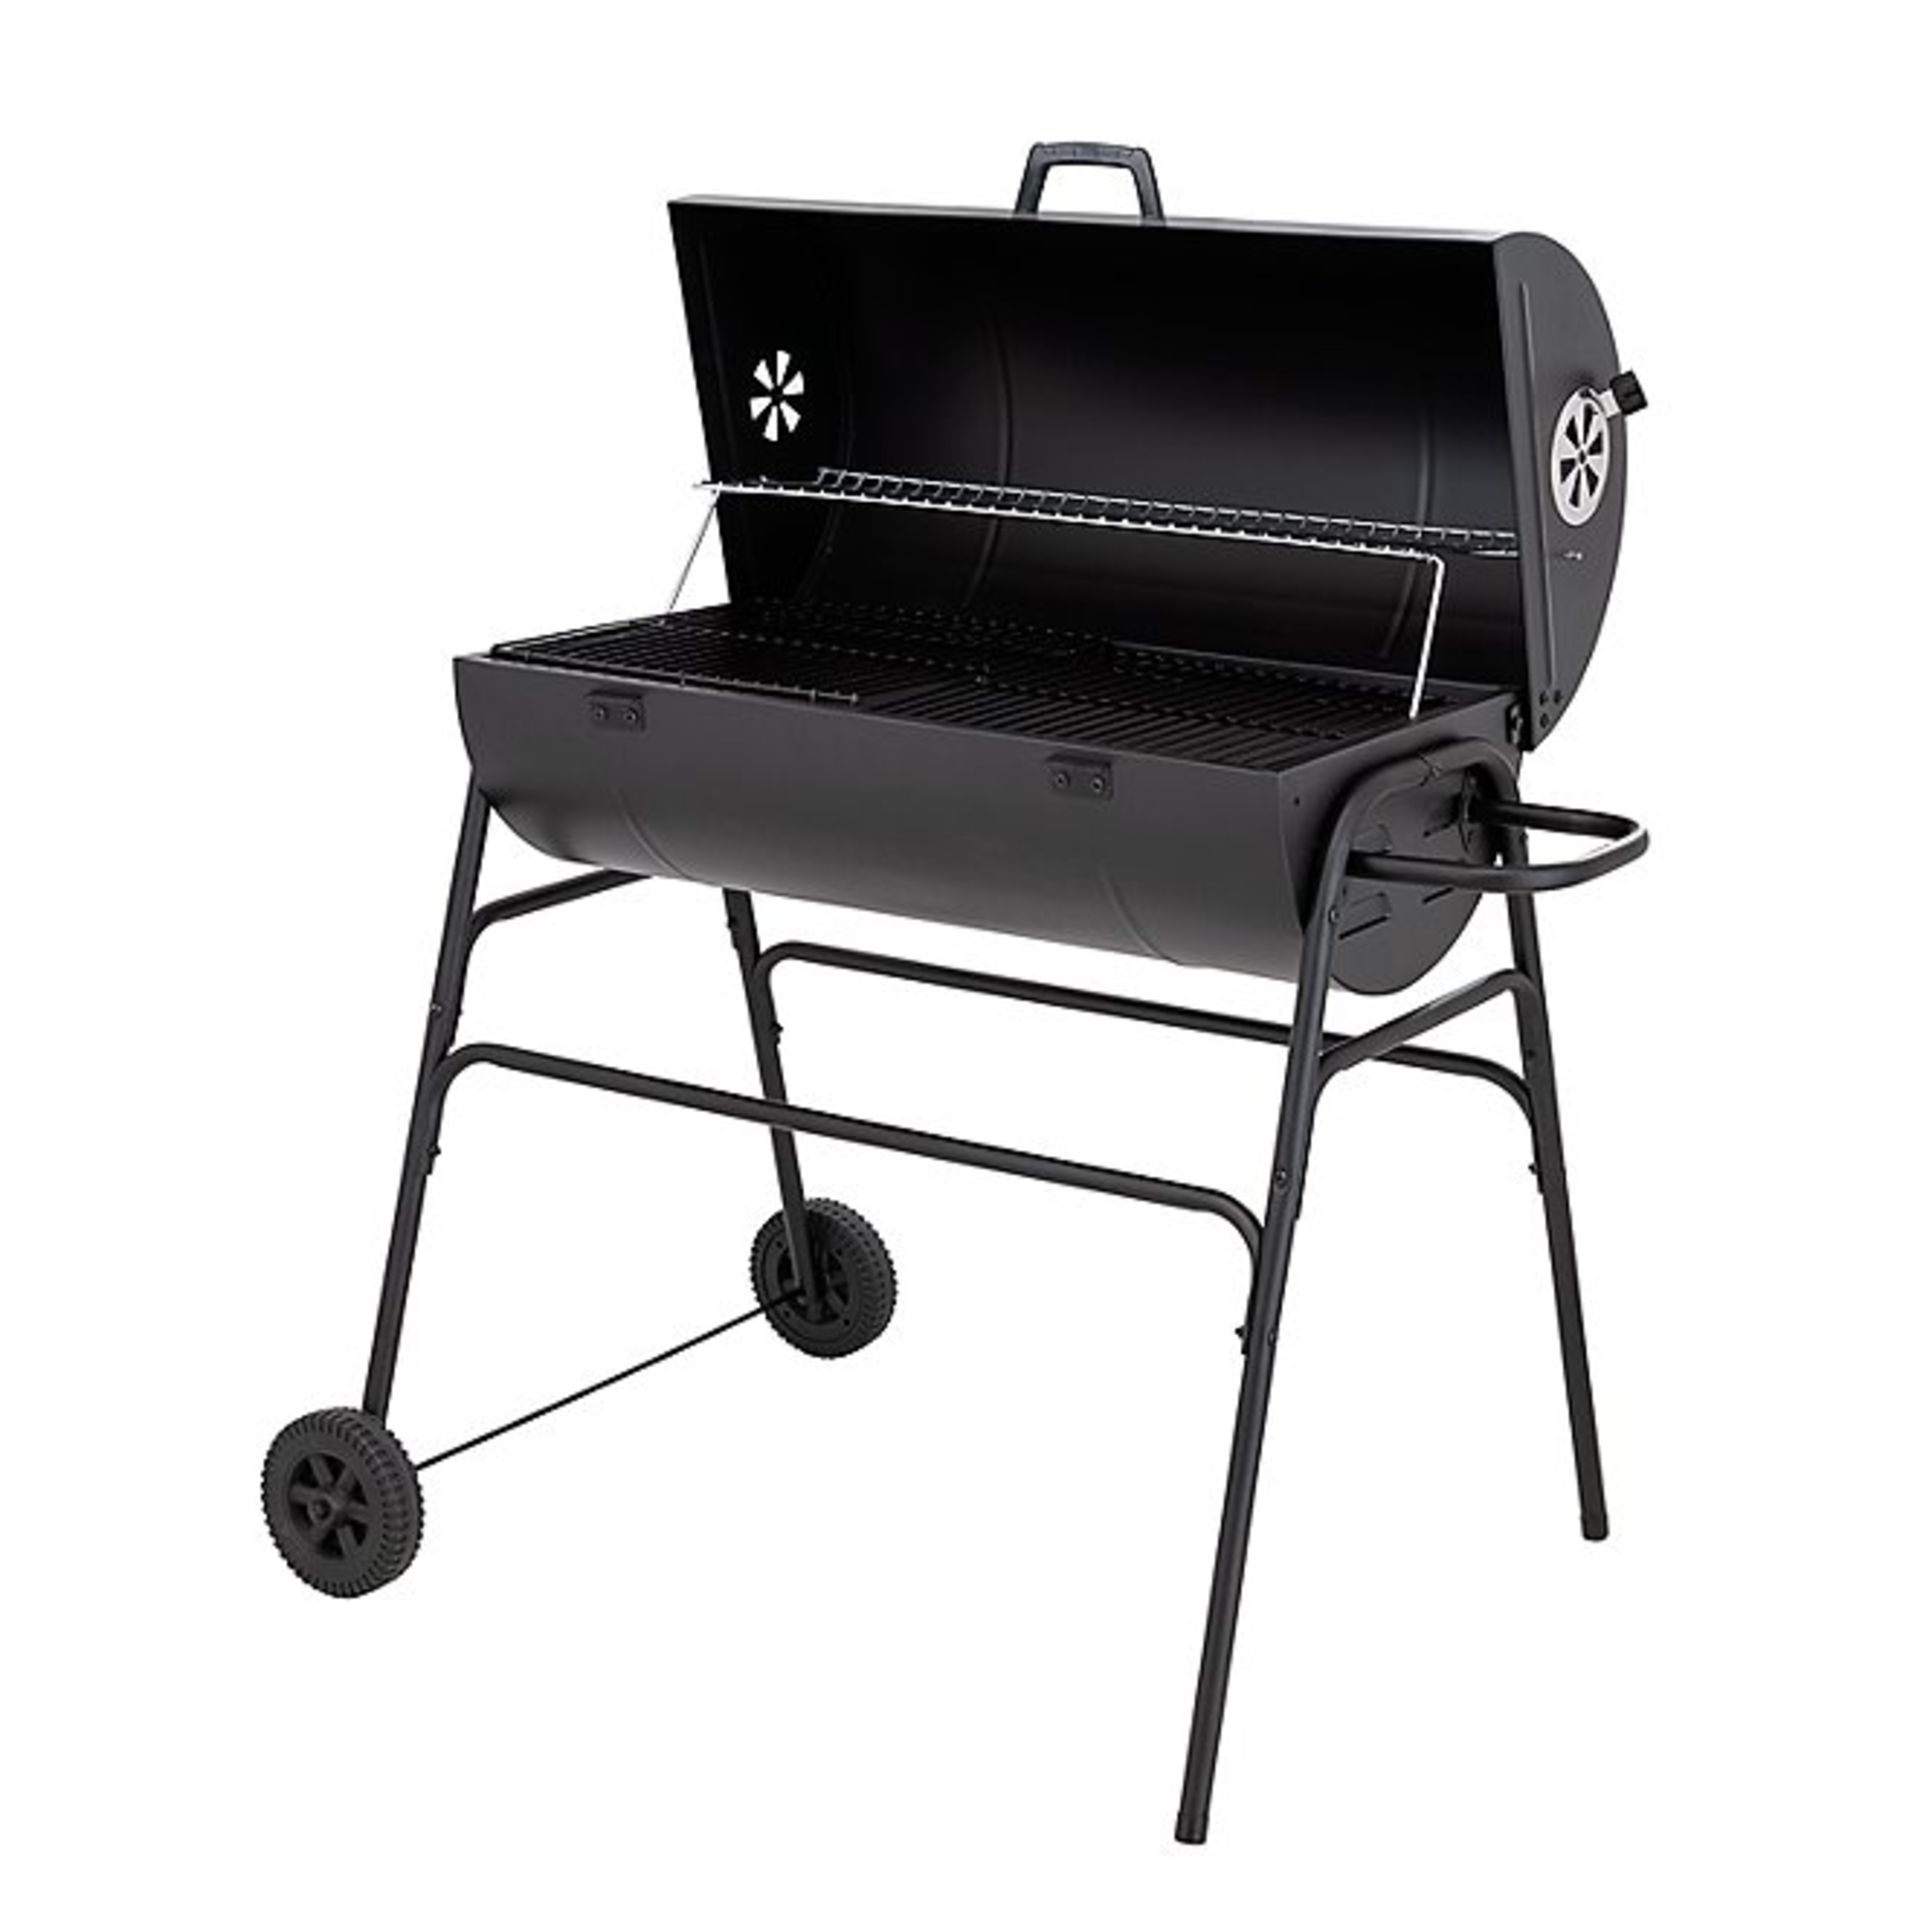 (R10E) 2x Expert Grill 75cm Barrel BBQ. Opened To Check Contents. Both Units Look Clean, Unused. (S - Image 2 of 5